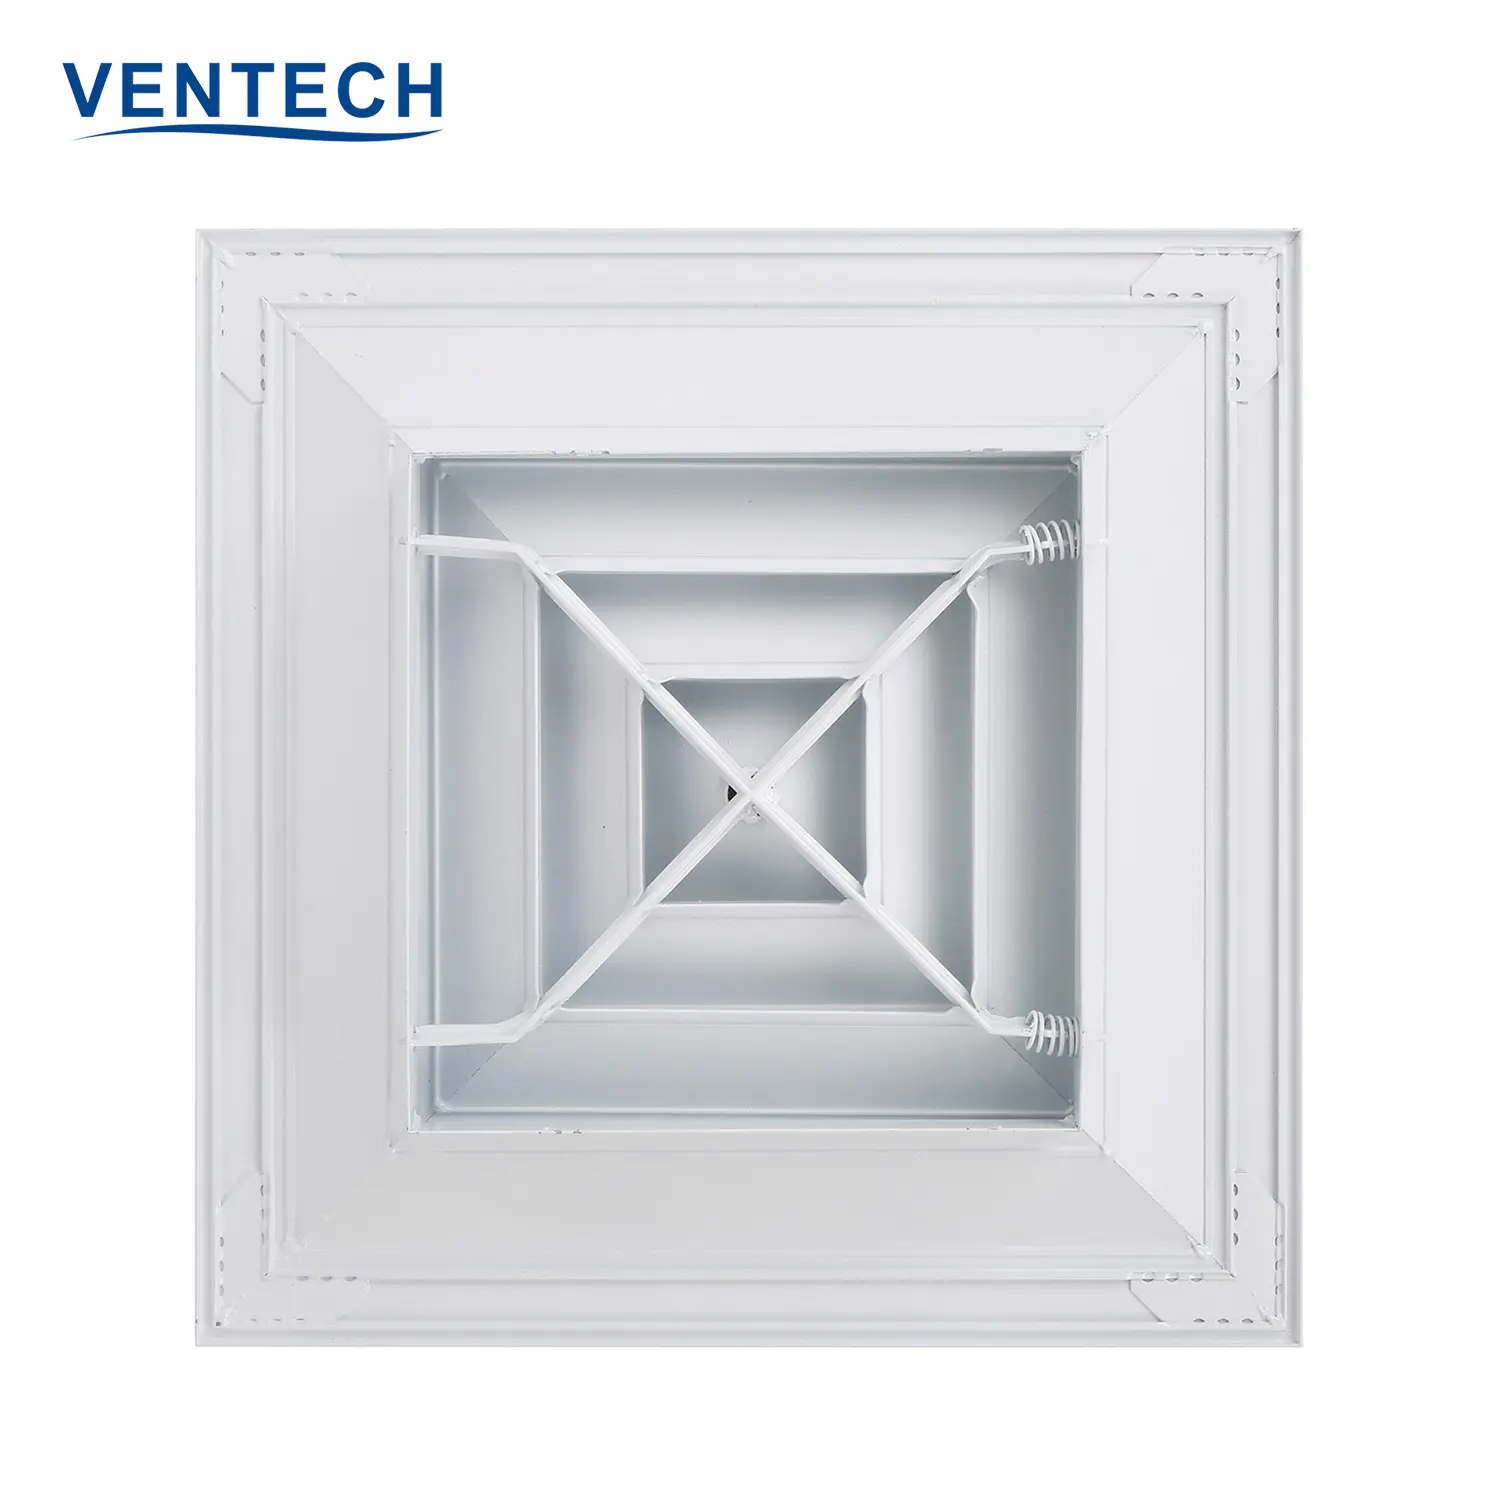 Hvac System VENTECH Ceiling Aluminum Exhaust Air Outlet Duct Conditioning Square Ceiling 4way Diffusers